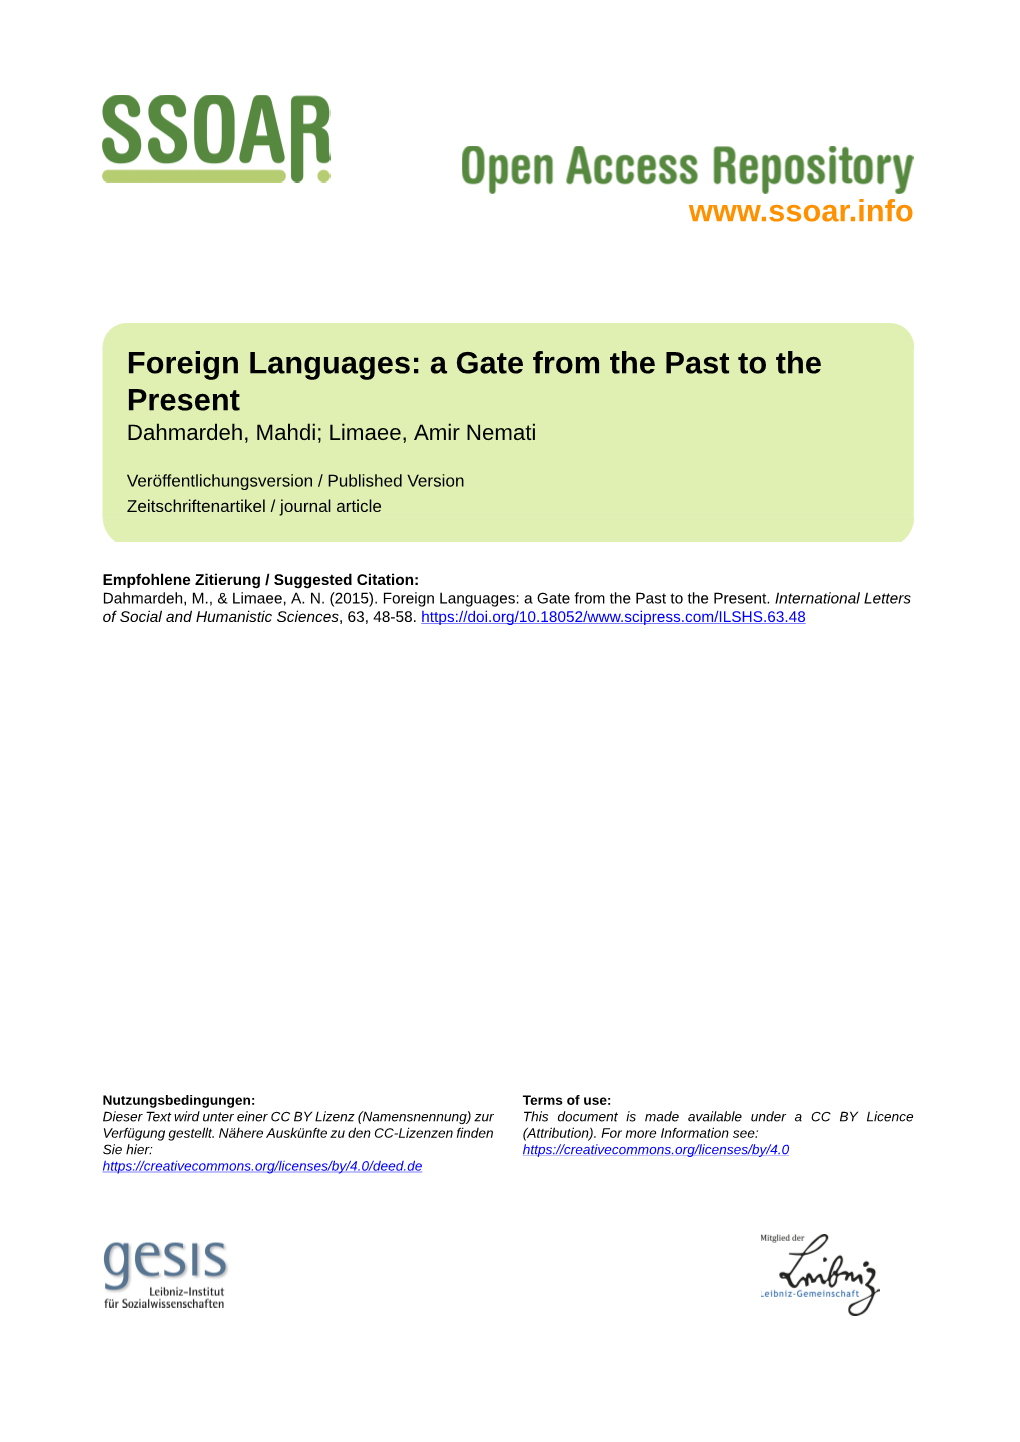 Foreign Languages: a Gate from the Past to the Present Dahmardeh, Mahdi; Limaee, Amir Nemati